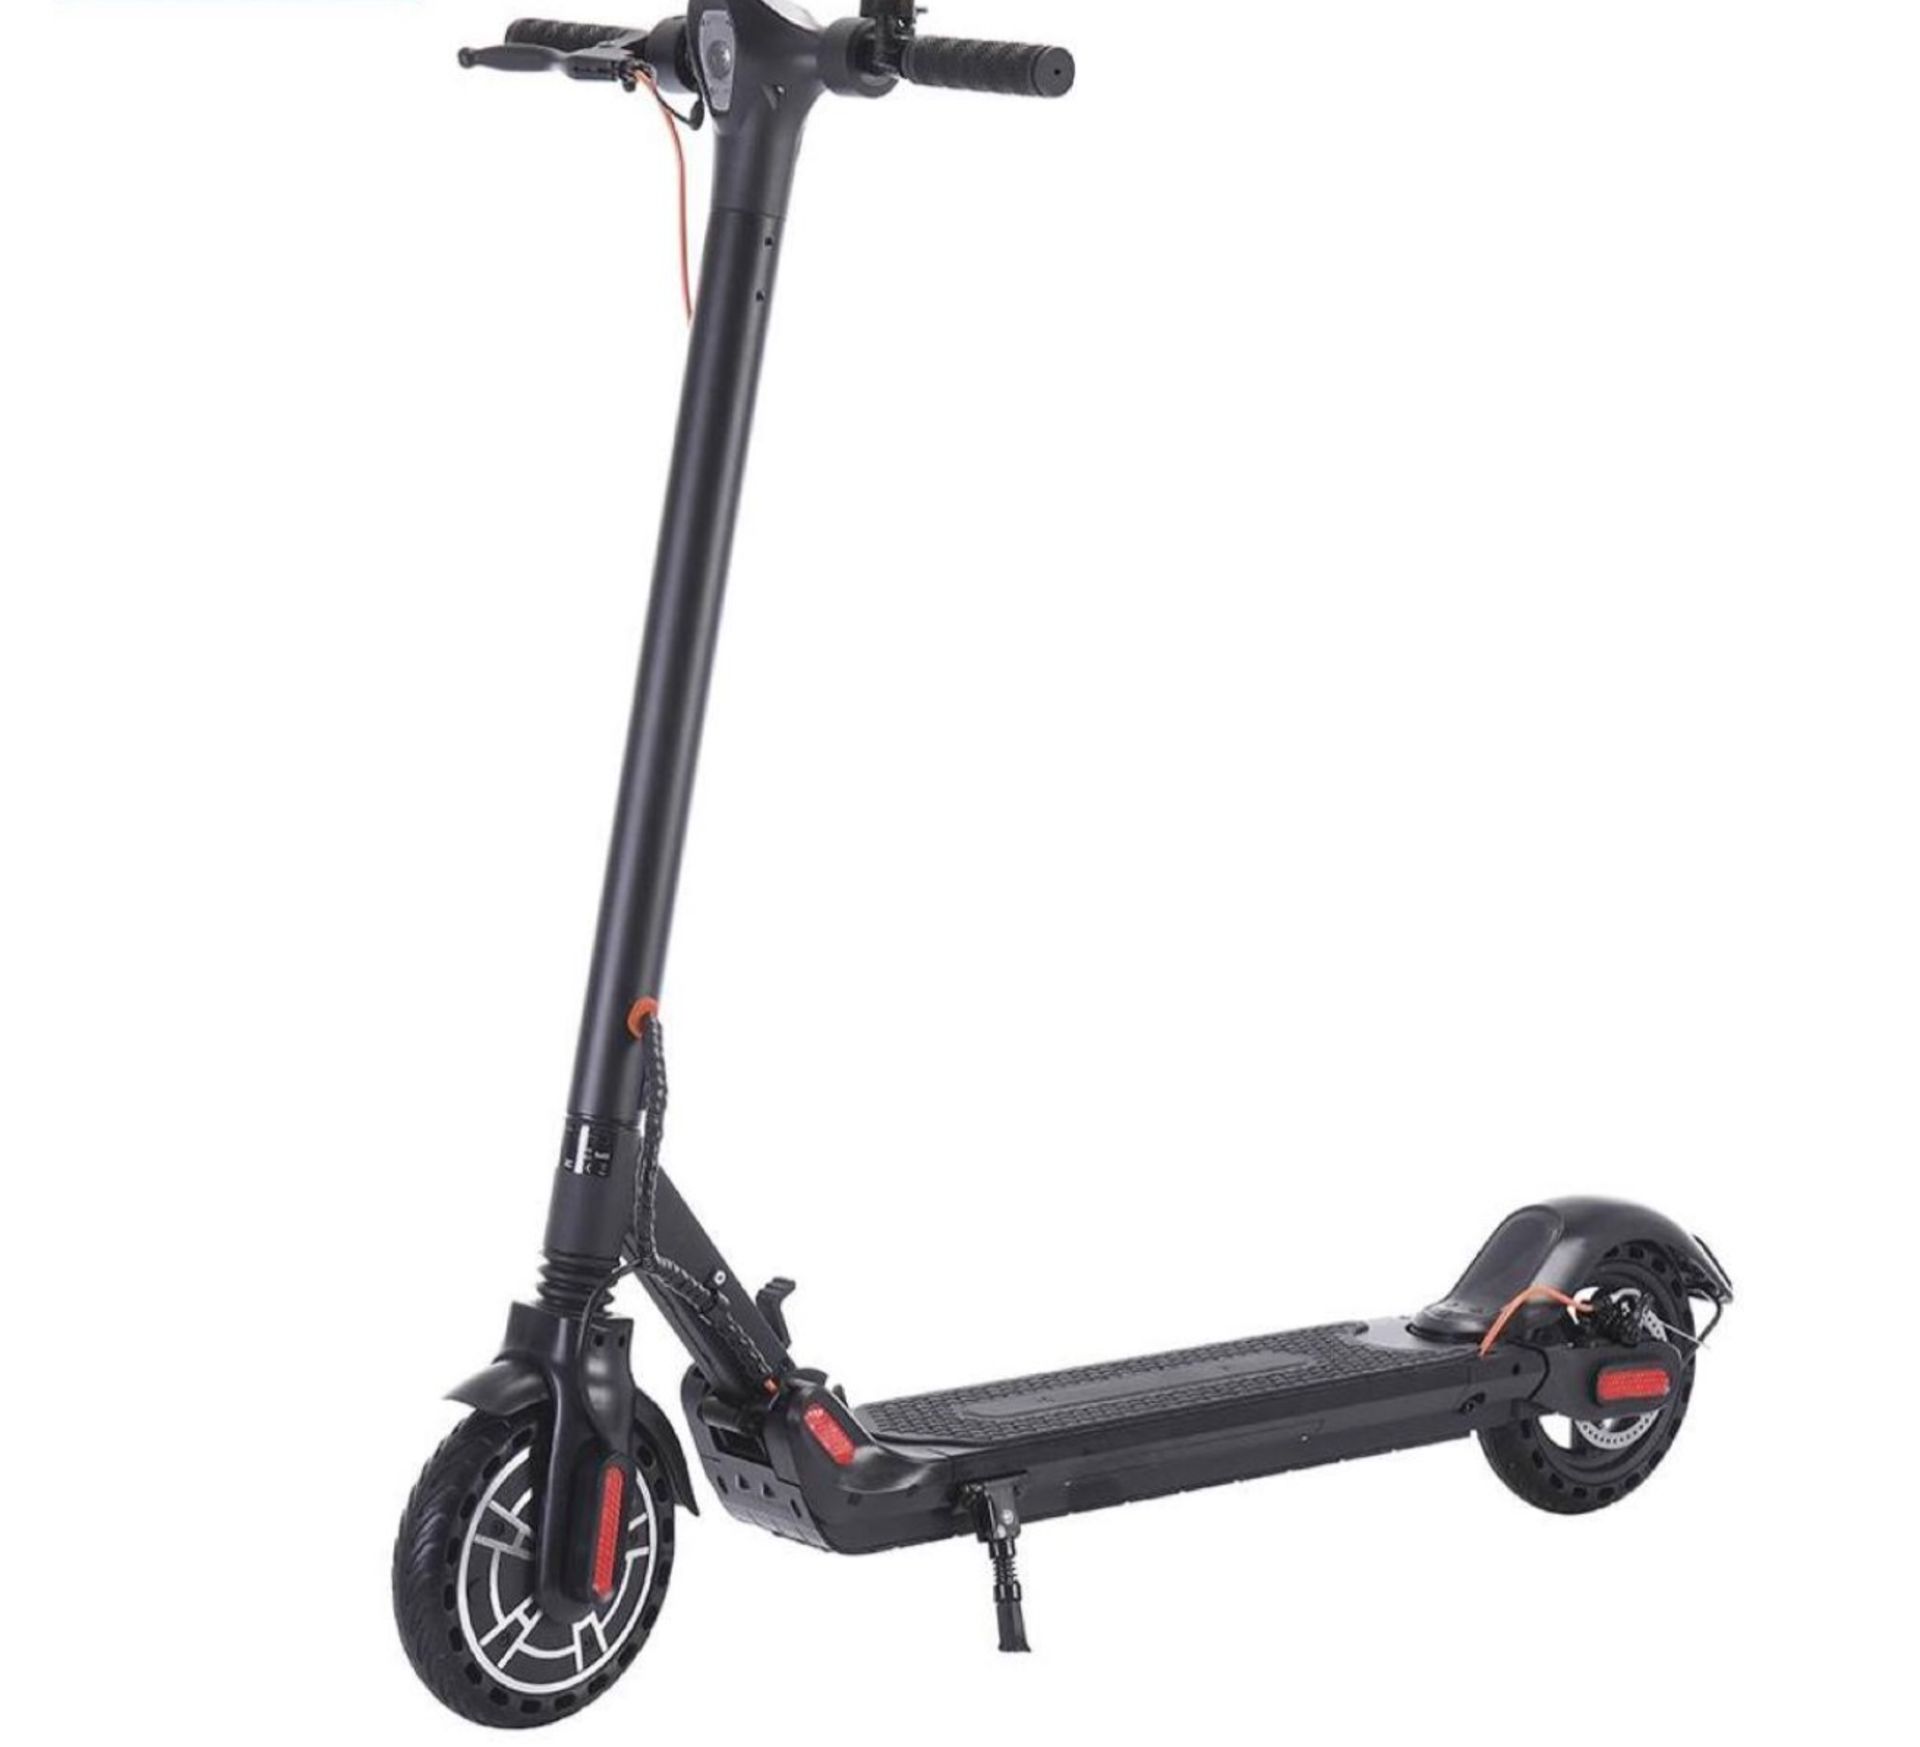 Brand New Gravity M5-1 Pro Electric Scooter 8.5 Inch Foldable Adult E-Scooter RRP £349